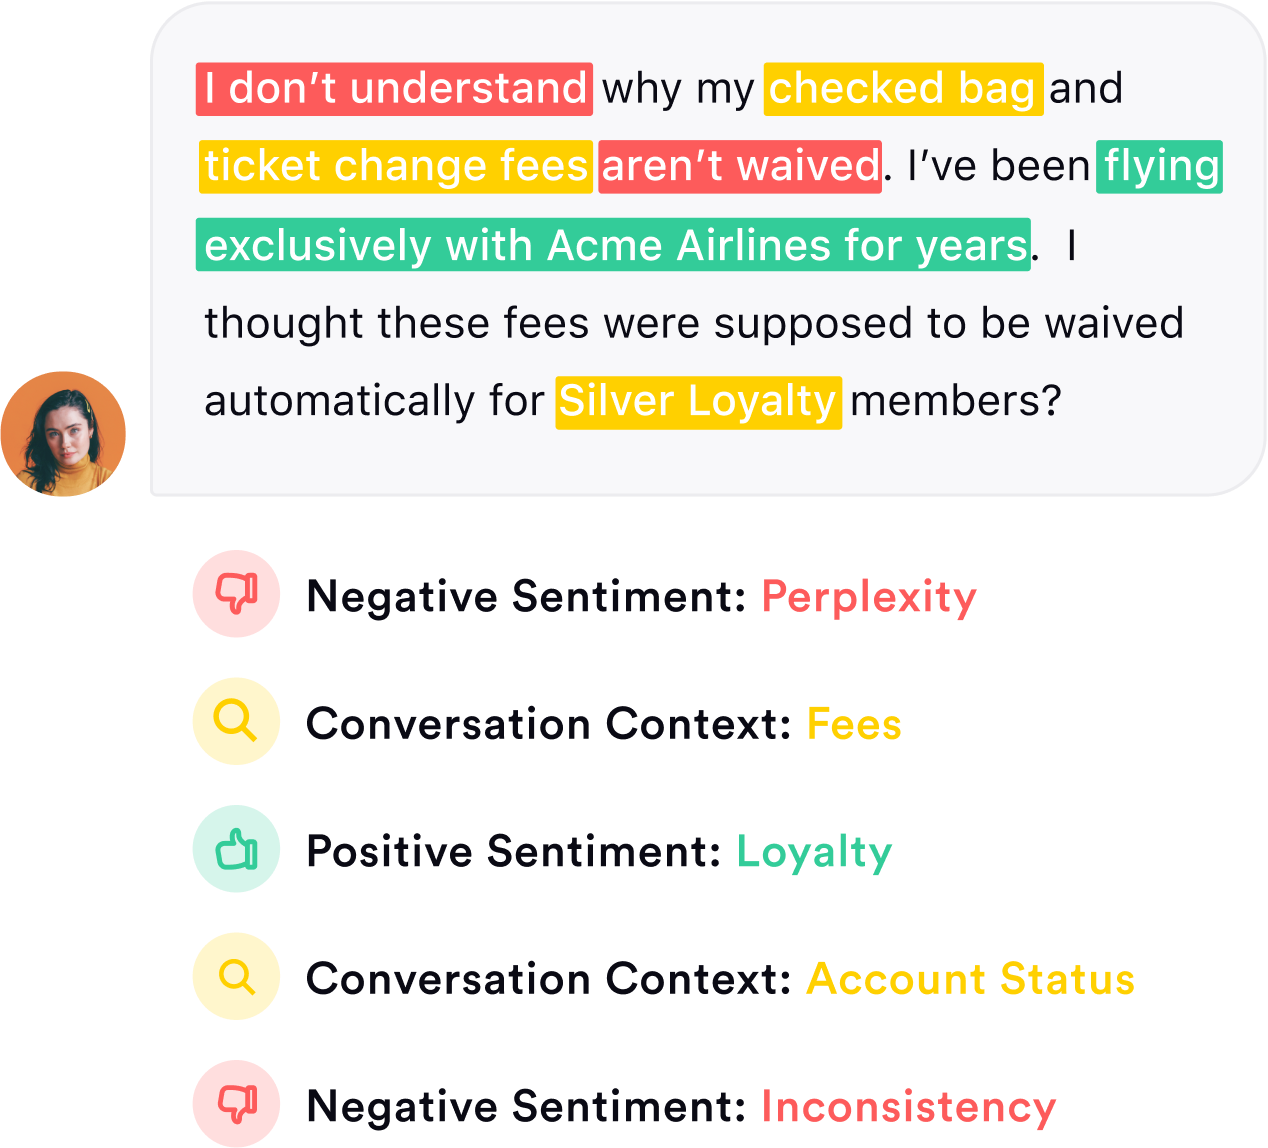 Screenshot detecting a customer's sentiment towards Acme Airlines based on their conversation